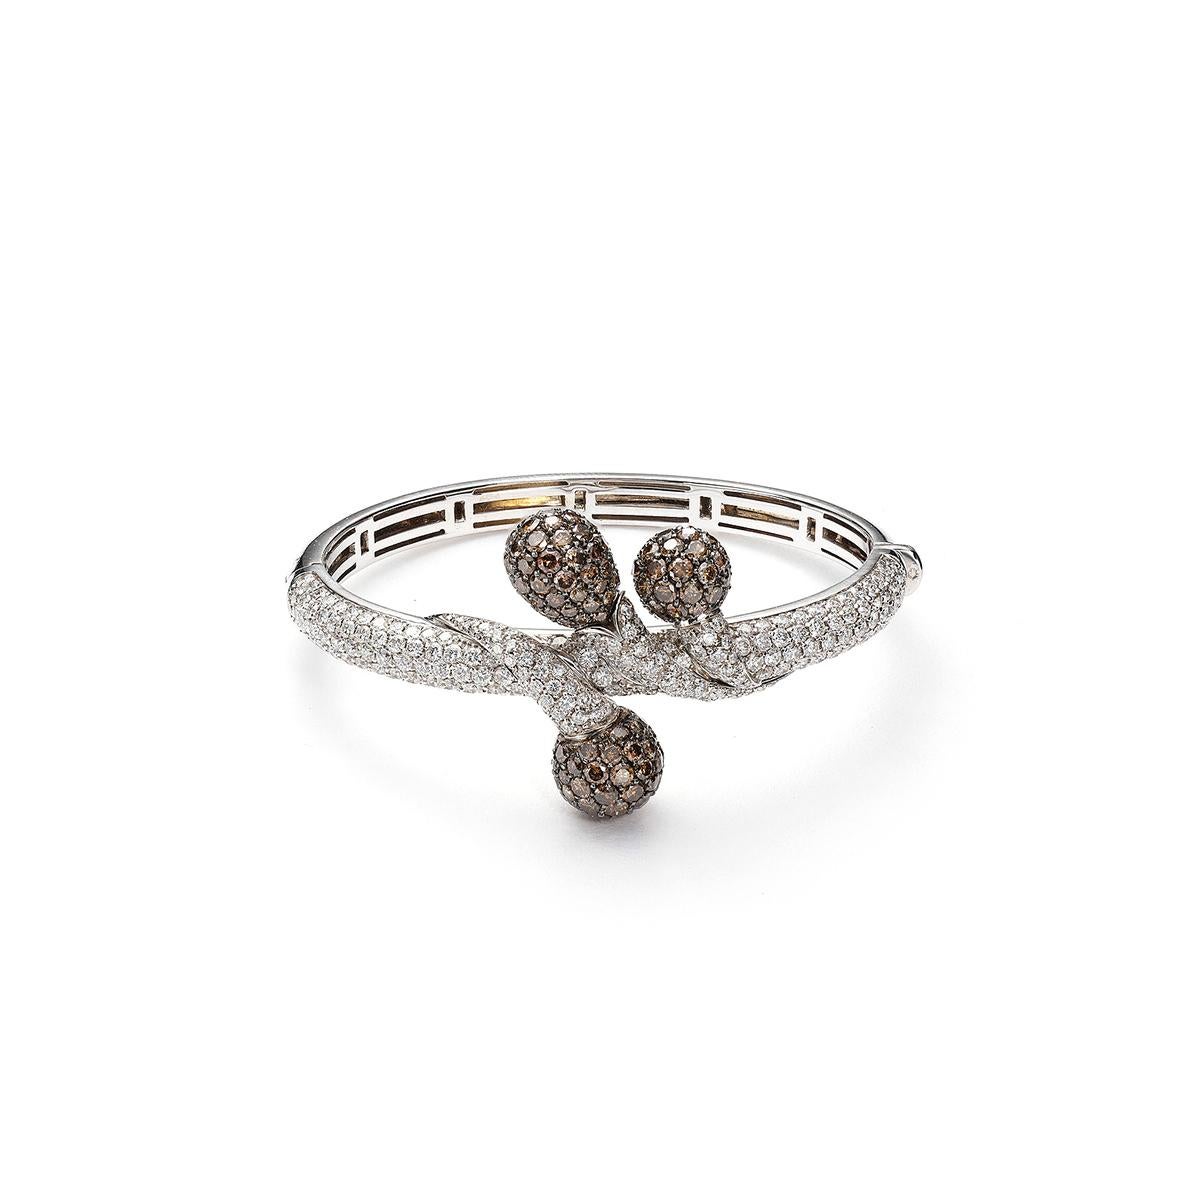 Bangle in 18kt white gold set with 237 diamonds 5.12 cts and 136 brown diamonds 5.77 cts